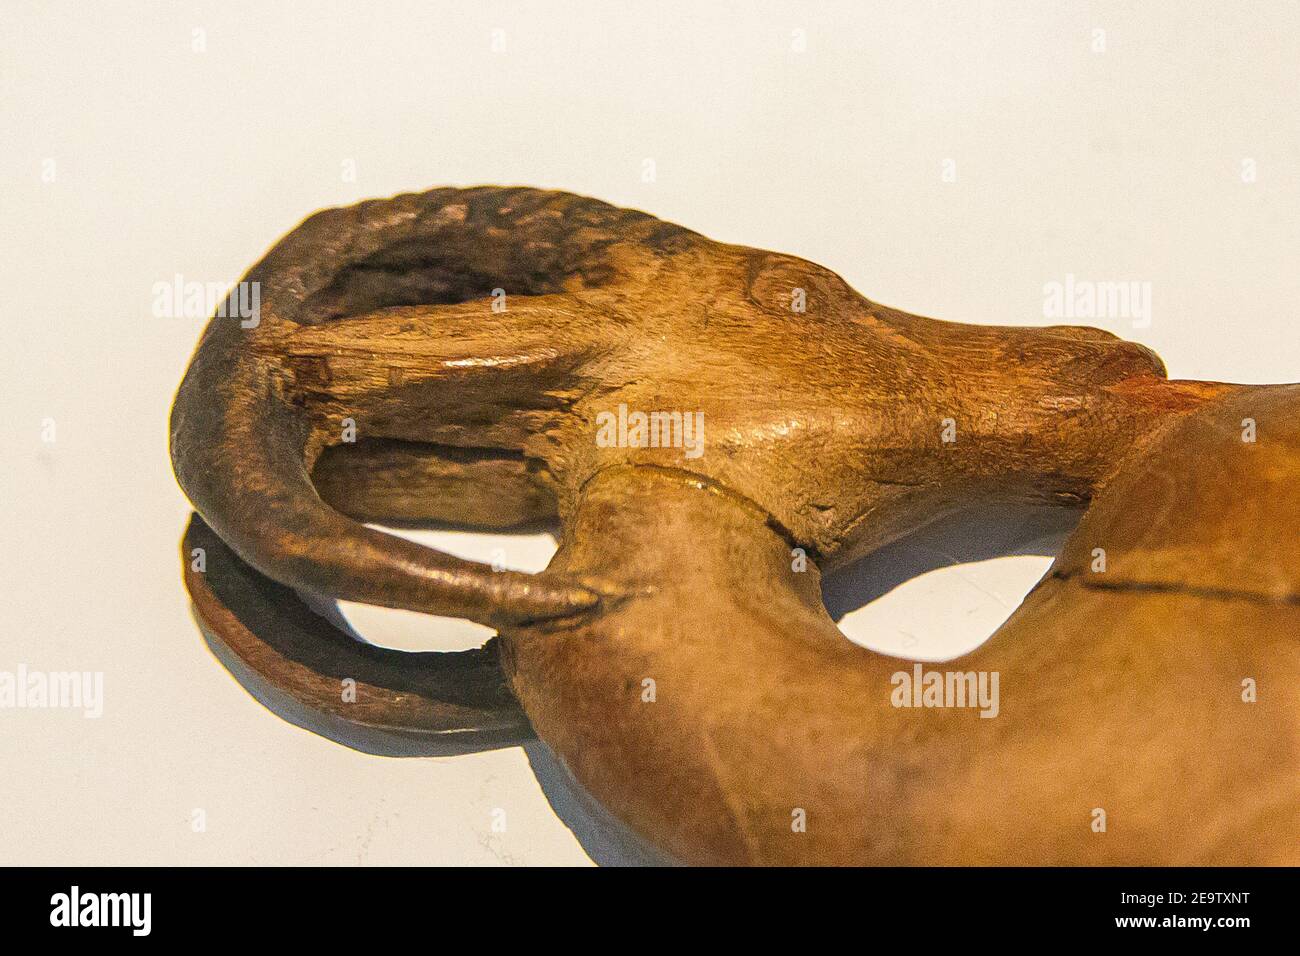 Exhibition 'The animal kingdom in Ancient Egypt', organized in 2015 by the Louvre Museum, in Lens. Offering spoon in the form of an ibex. Stock Photo